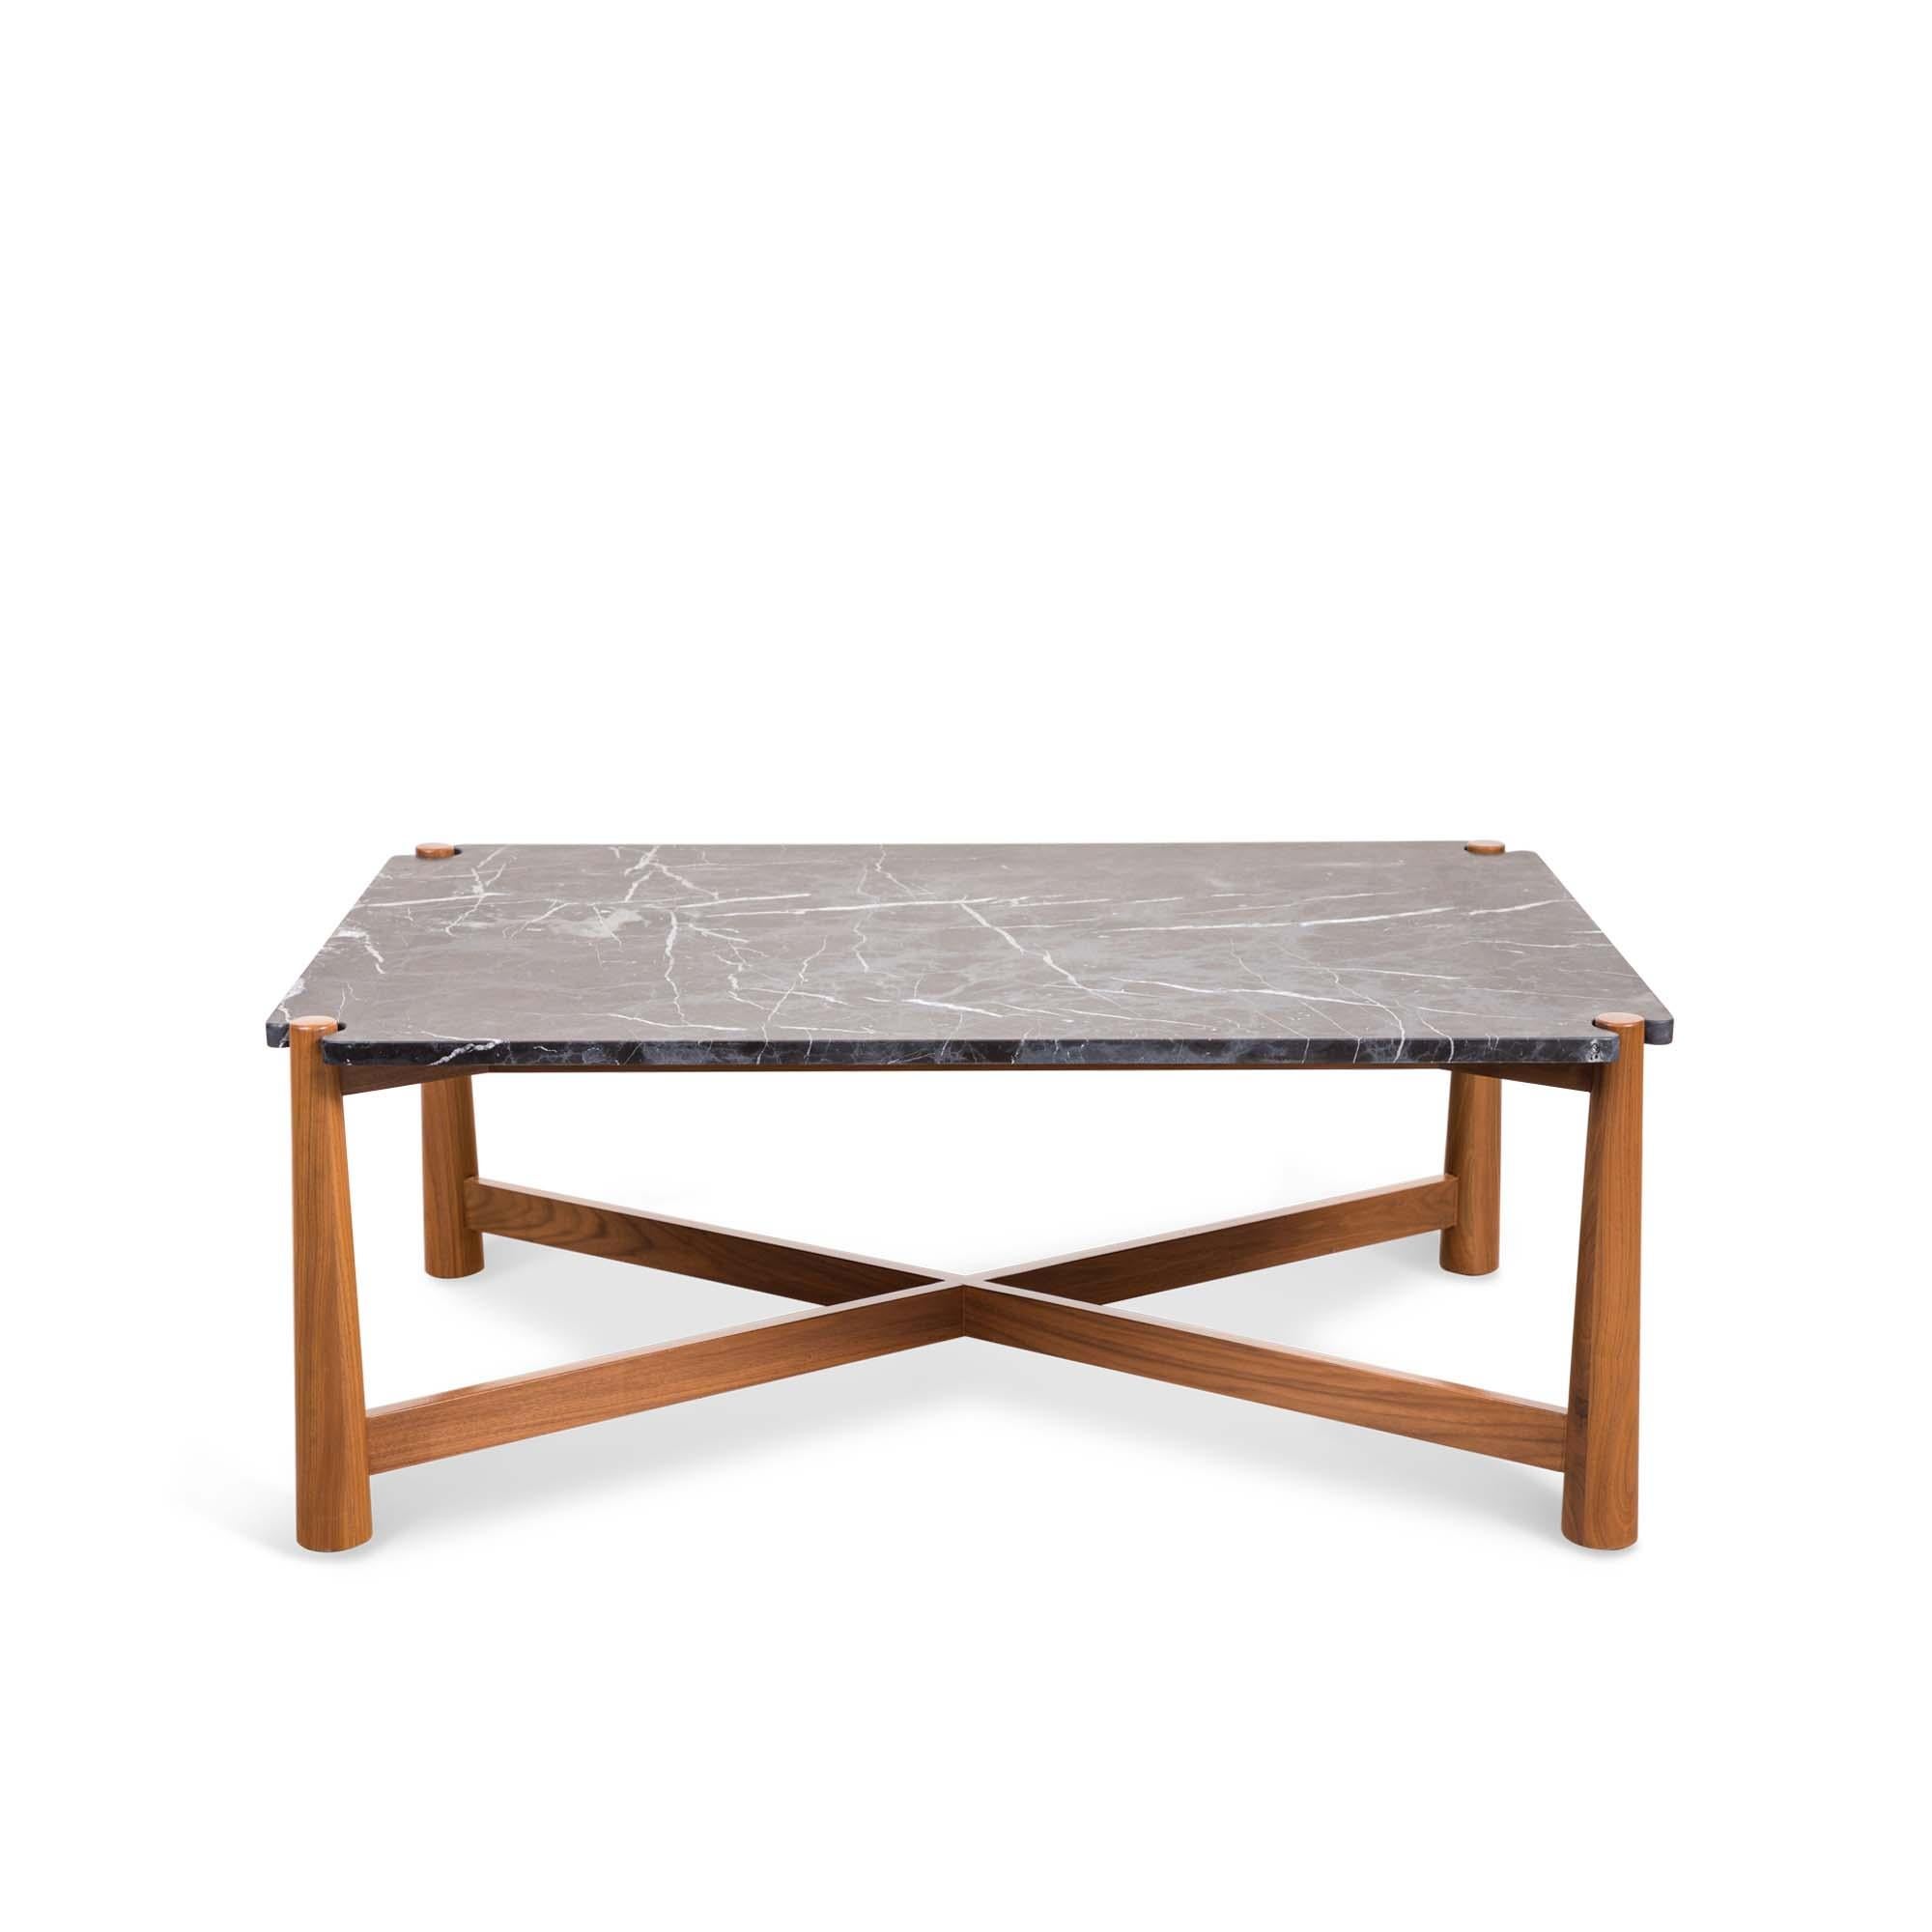 The Bronson coffee table features a stone top with notched corners that rests atop a detailed American walnut or white oak base.

The Lawson-Fenning Collection is designed and handmade in Los Angeles, California. Reach out to discover what options